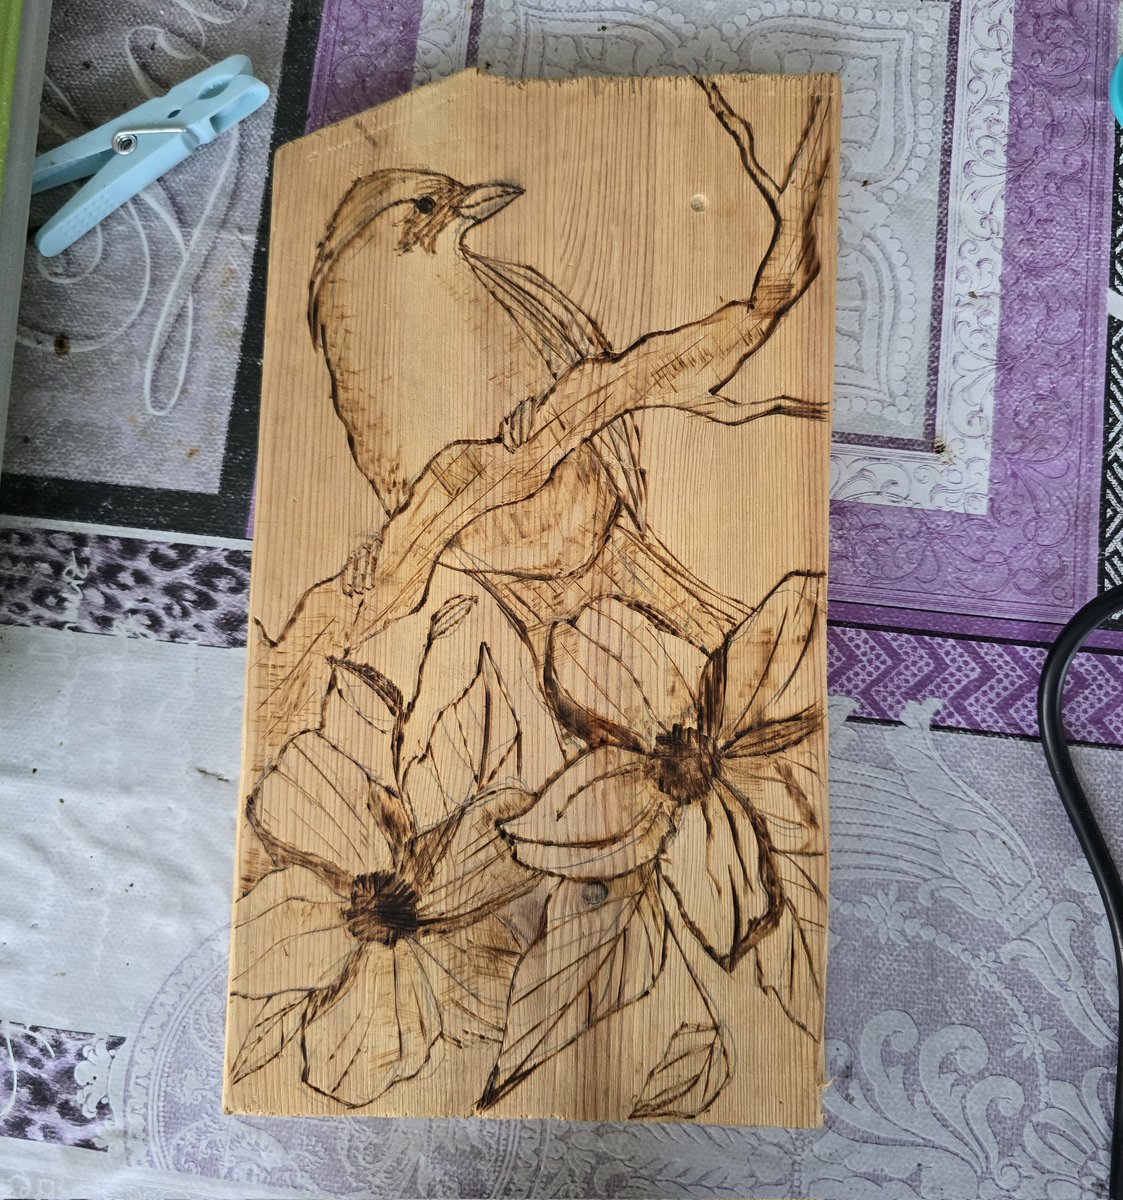 For my first attempt at woodburning, I'm quite happy with it. Of course, there are a LOT of mistakes, but honestly? It was fun!